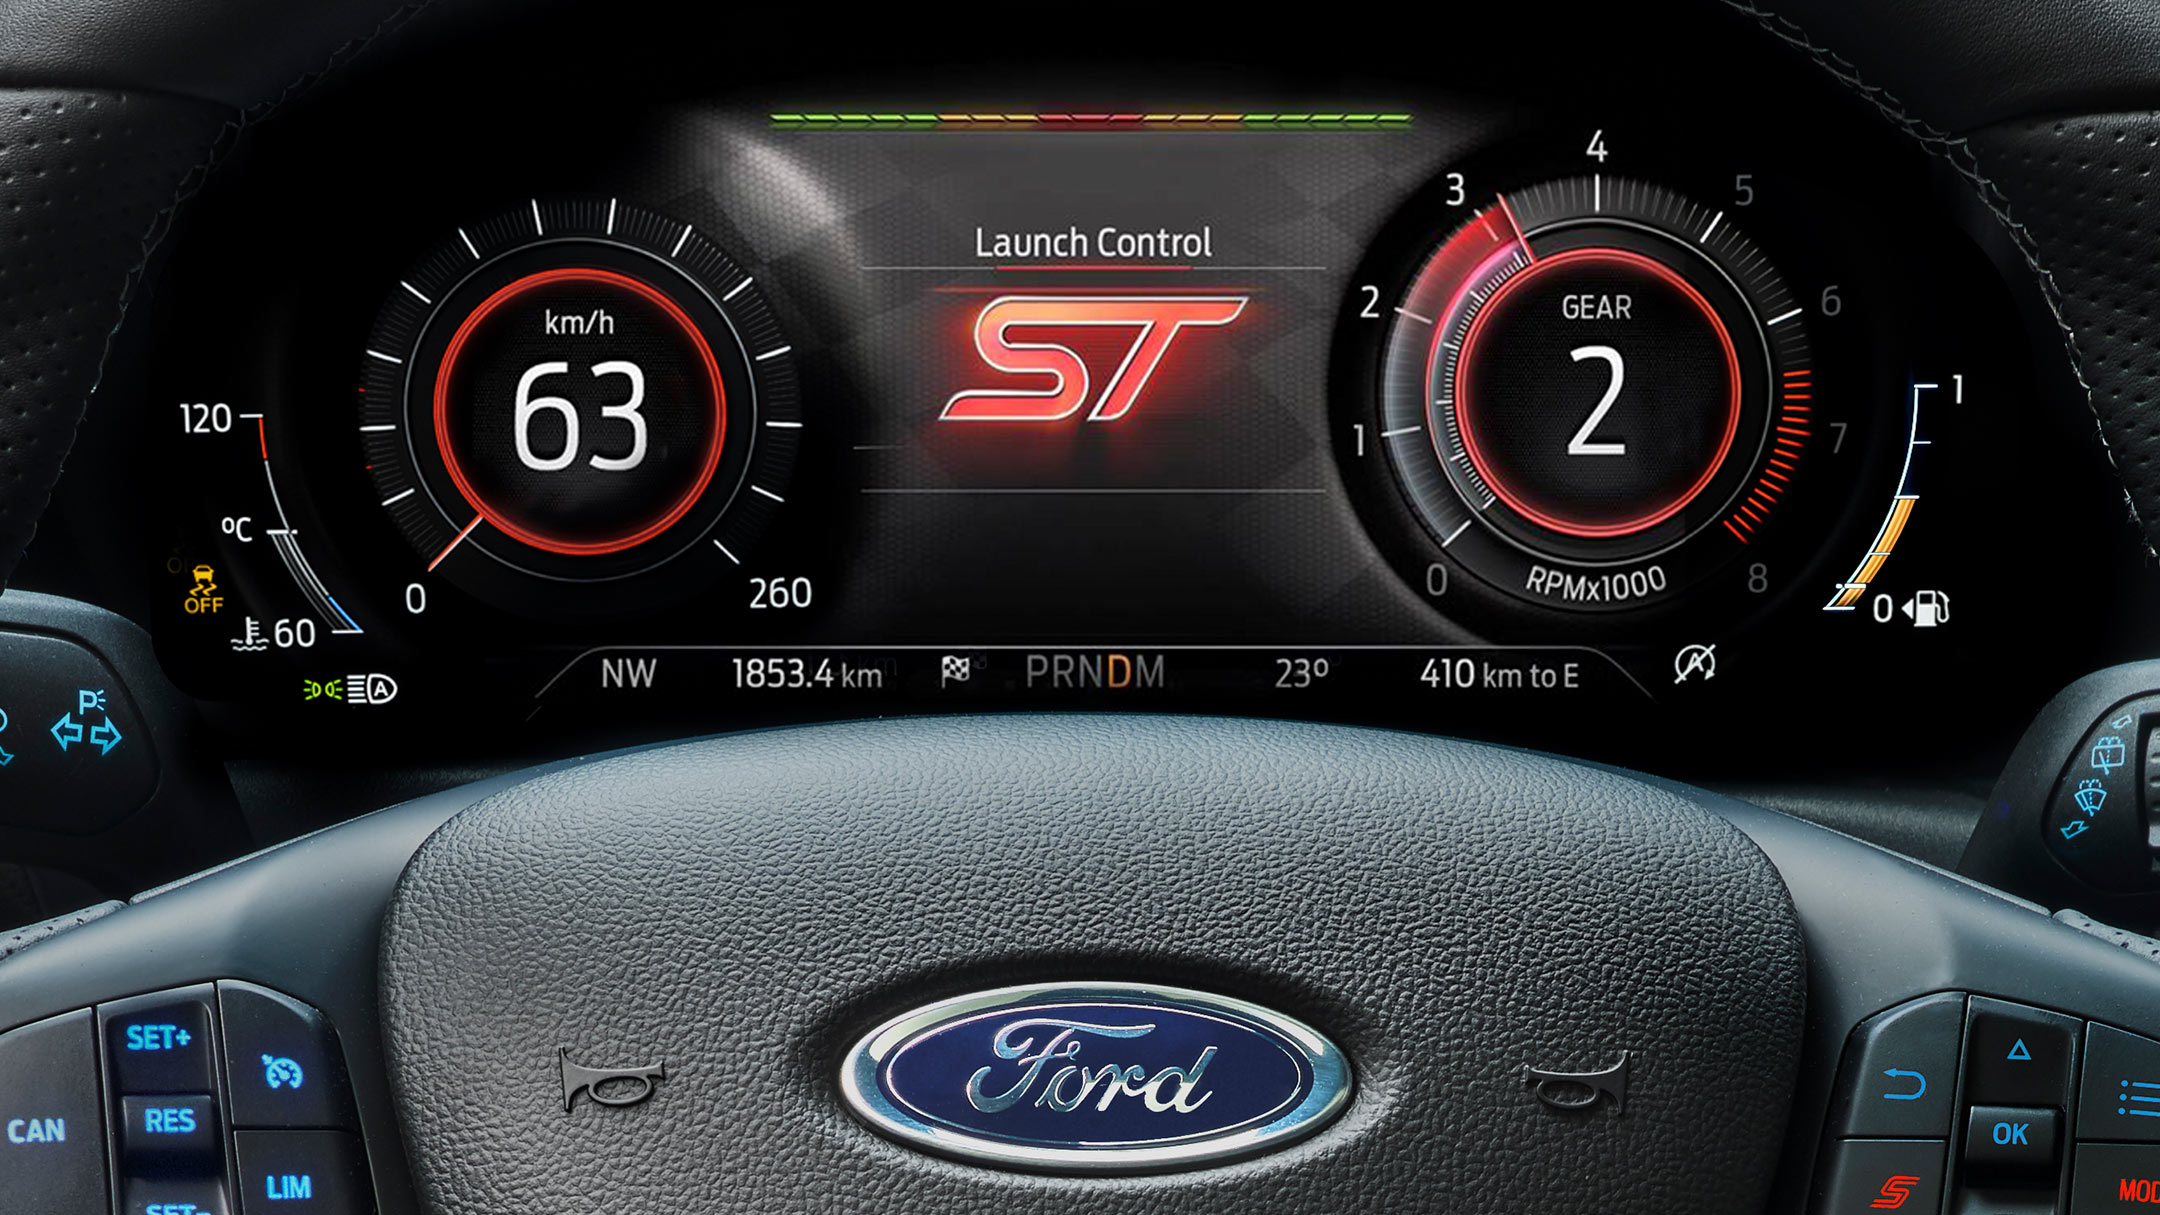 Ford Focus ST, Launch Control.